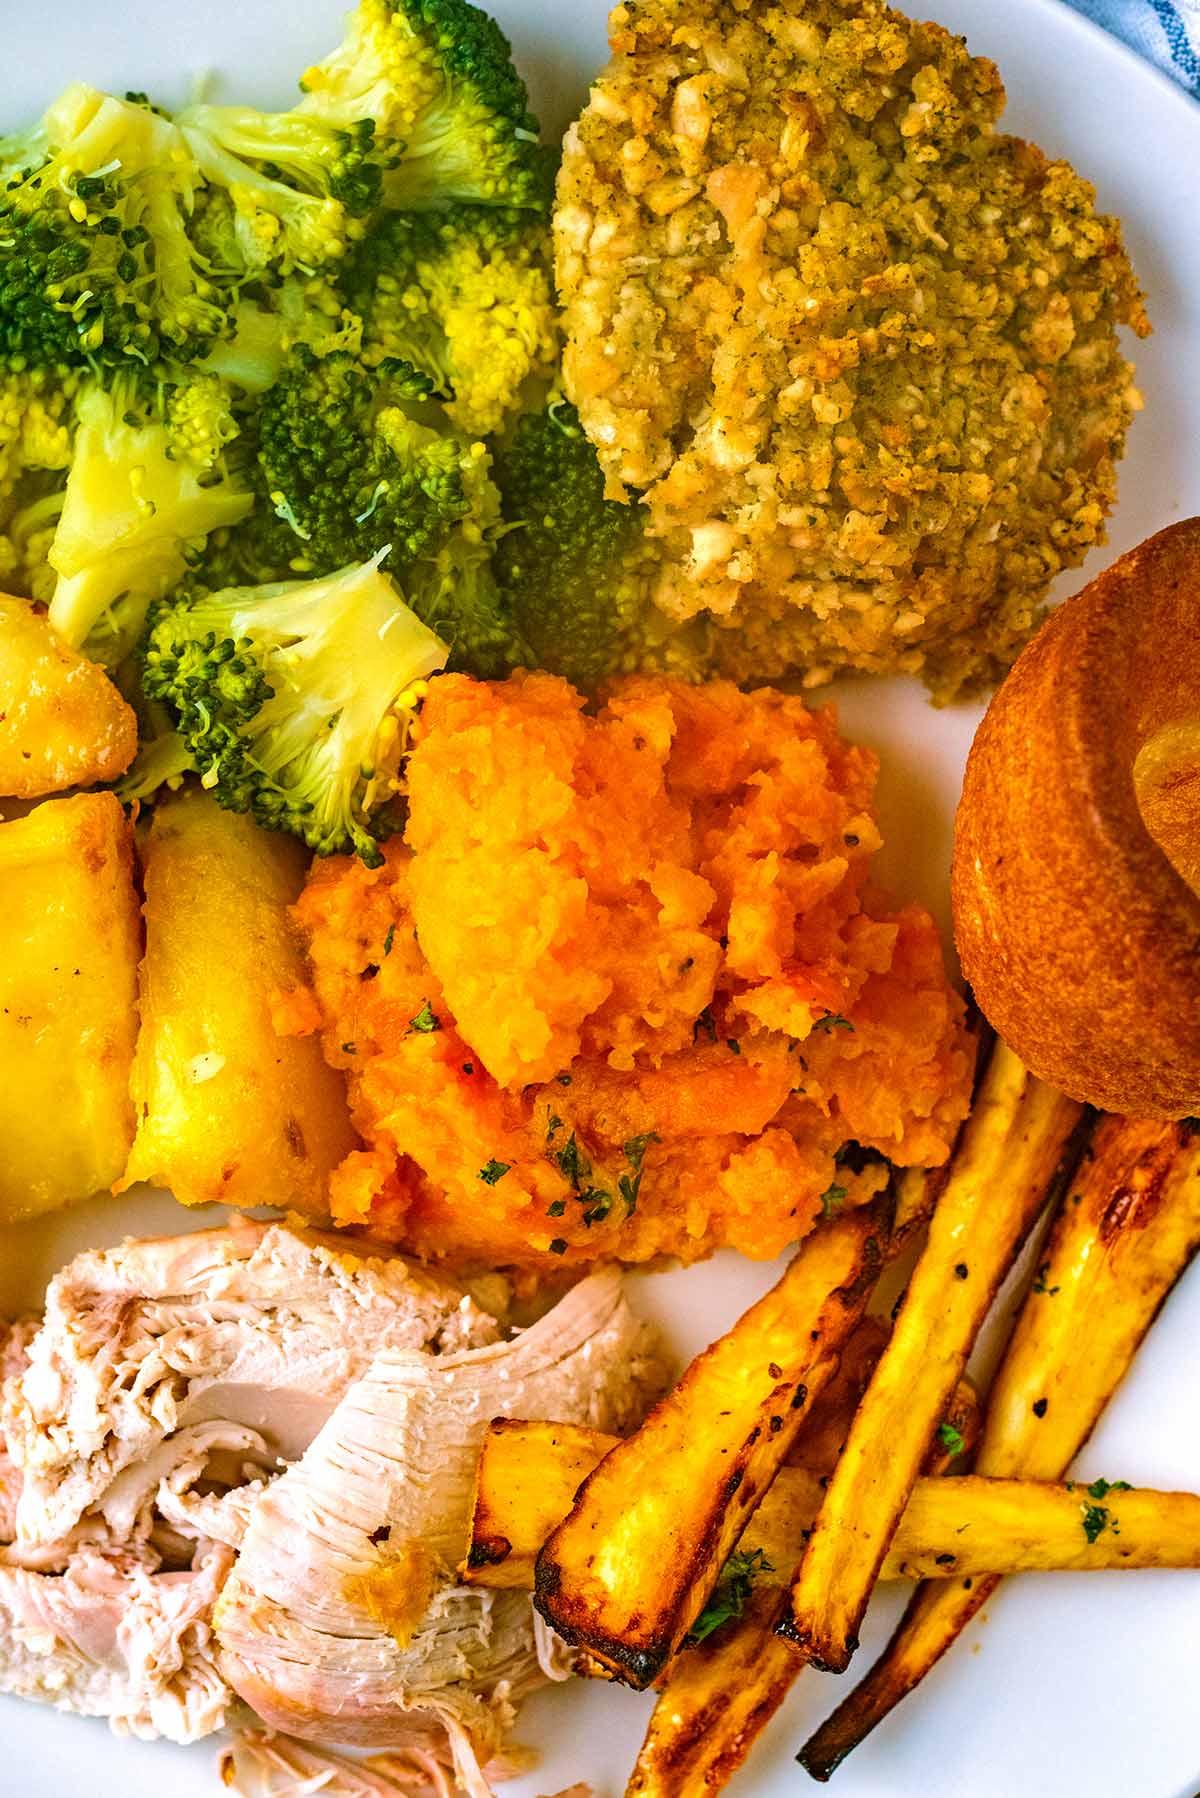 Carrot and swede mash on a plate with roast chicken, broccoli, potatoes, parsnips and stuffing.